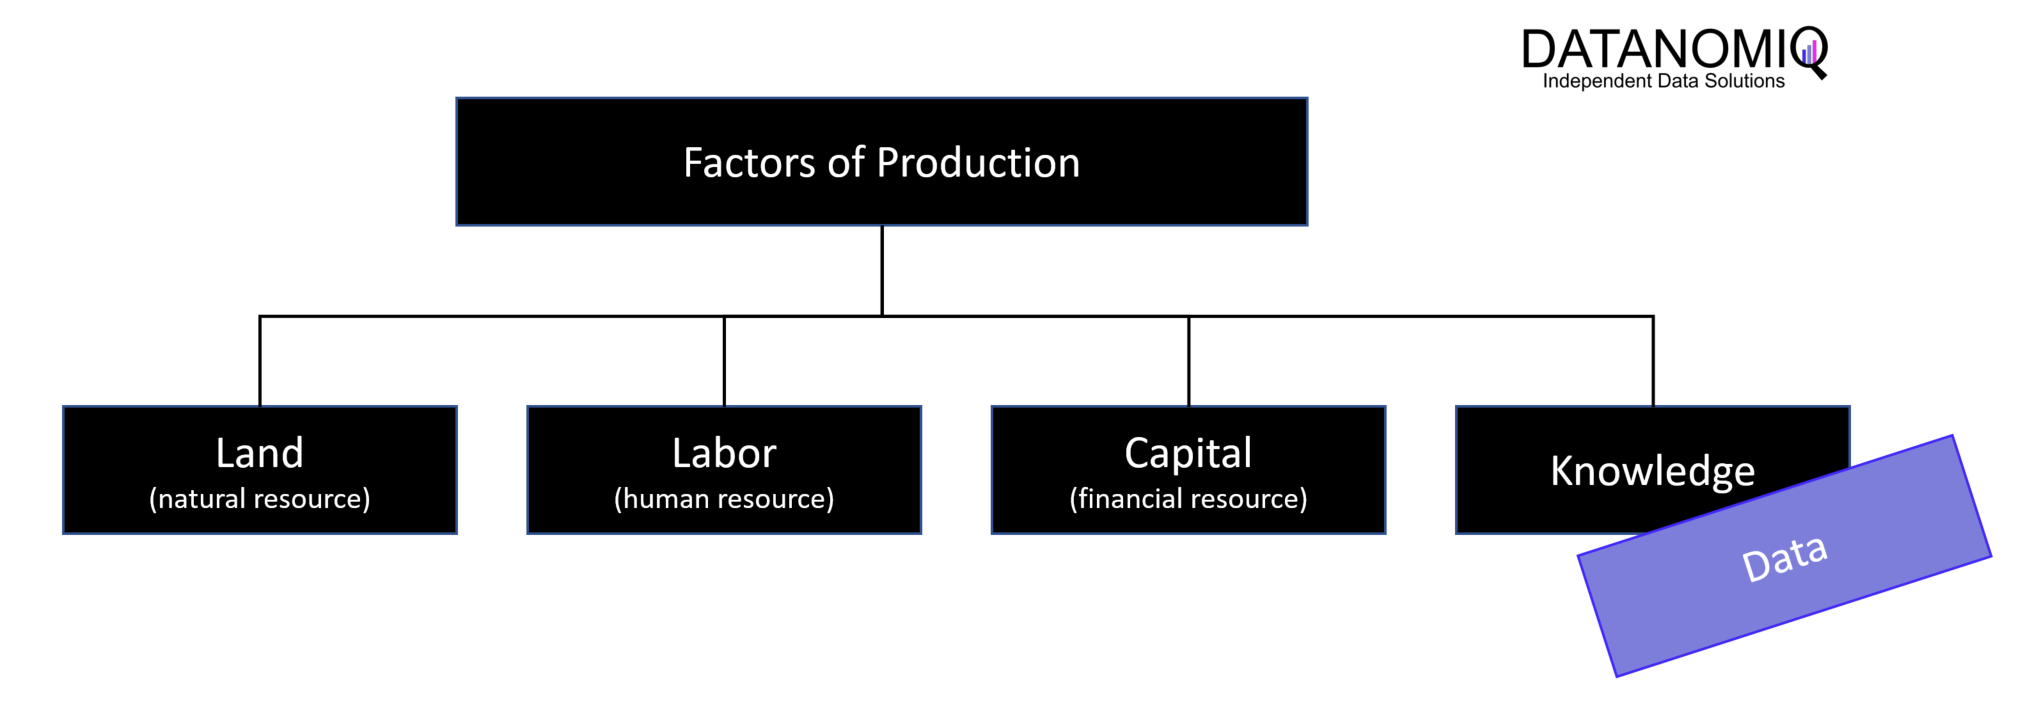 Factors of Production - The role of data